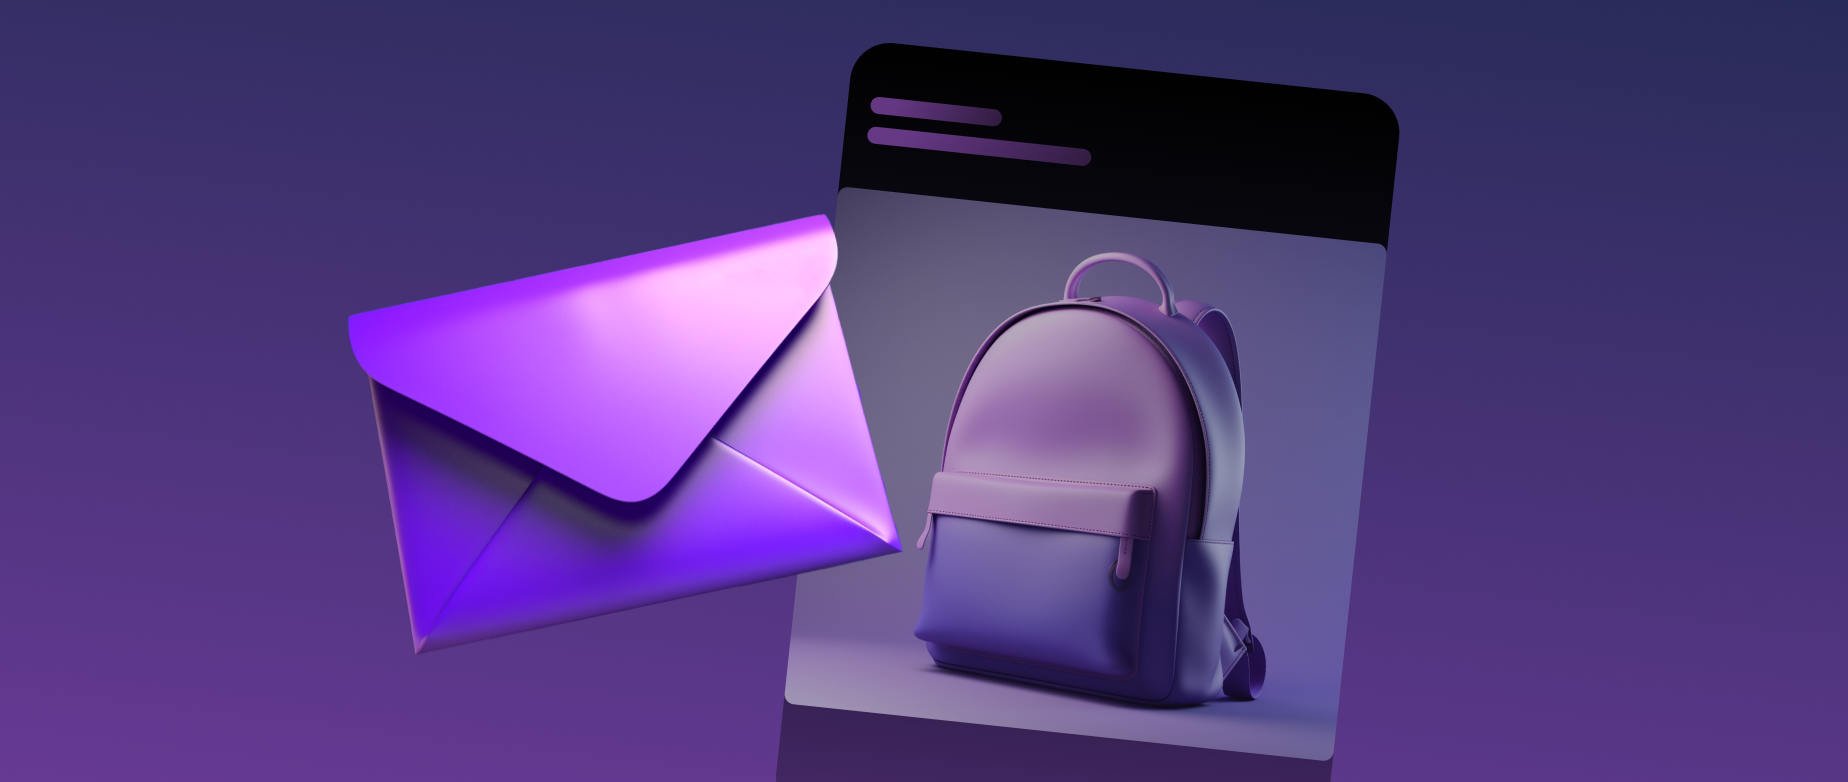 A purple envelope next to an image of an ad for a purple backpack on a purple background.